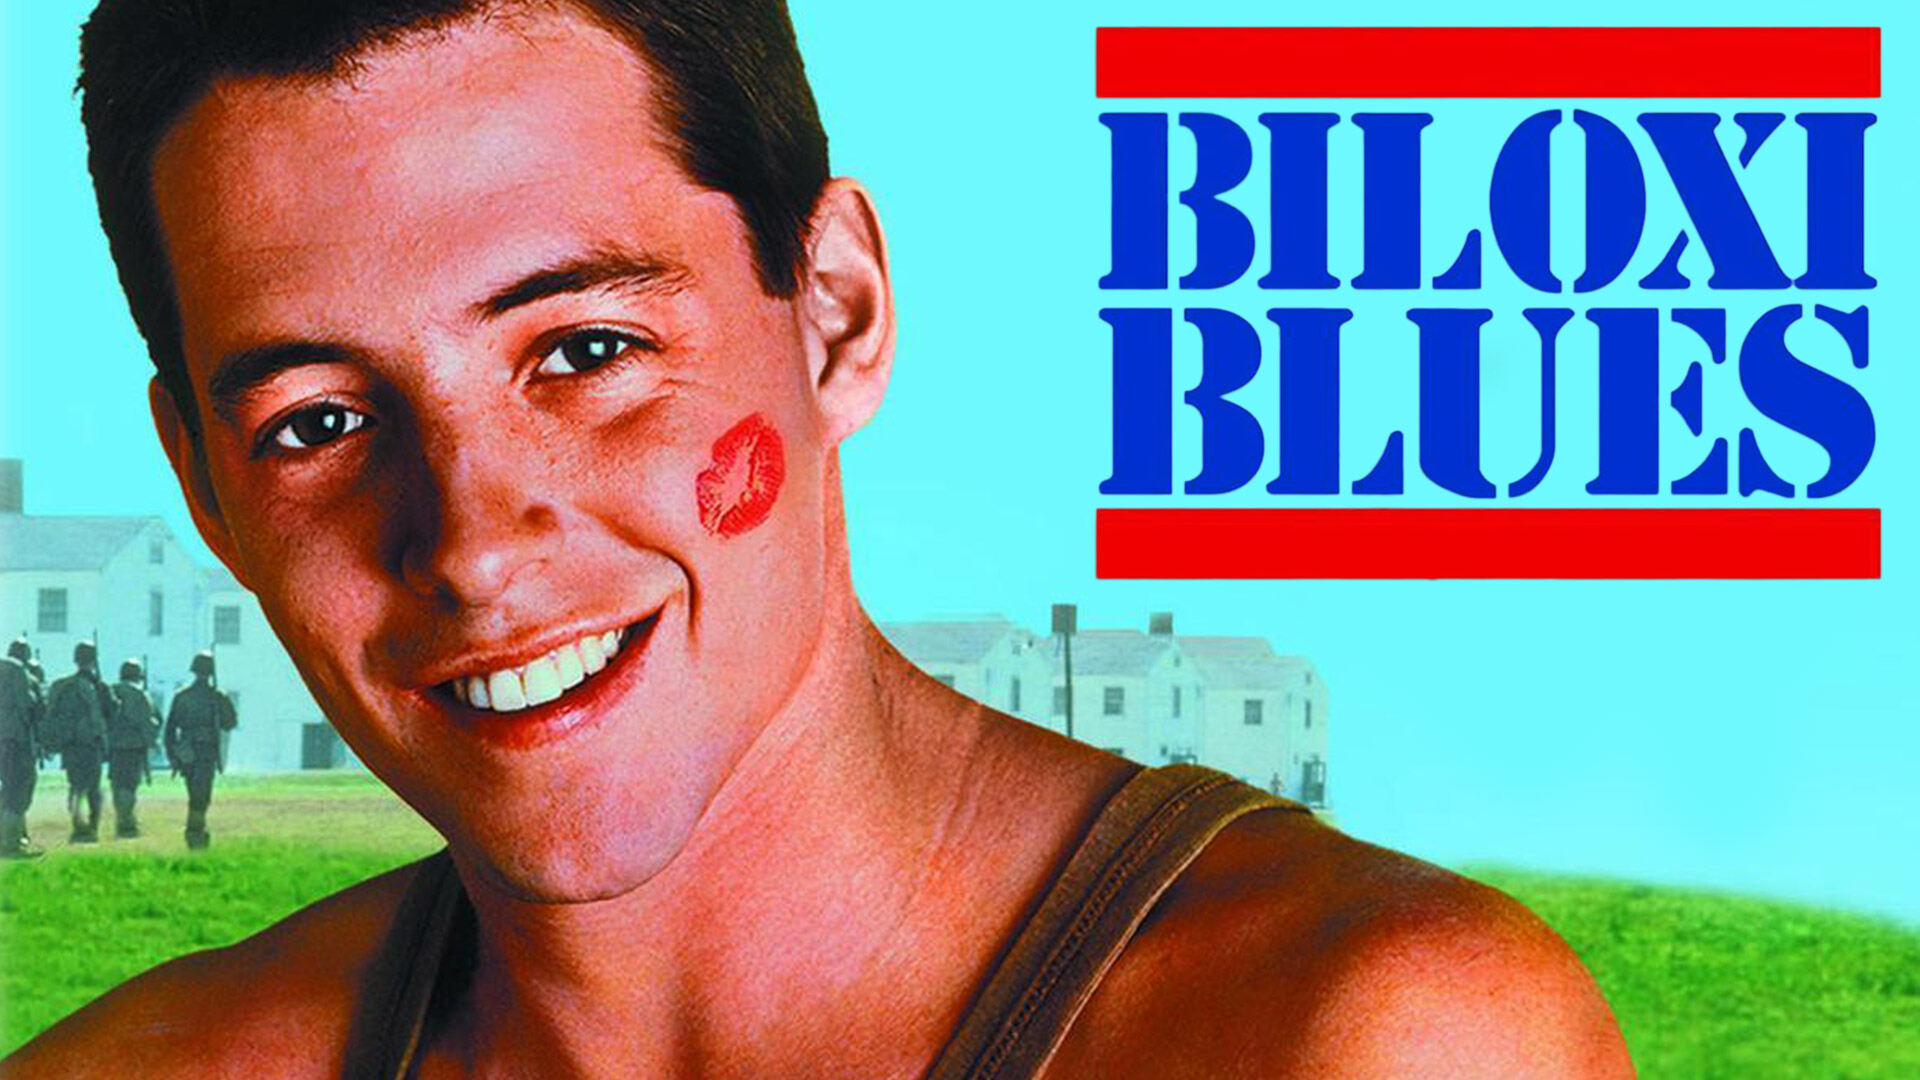 41-facts-about-the-movie-biloxi-blues